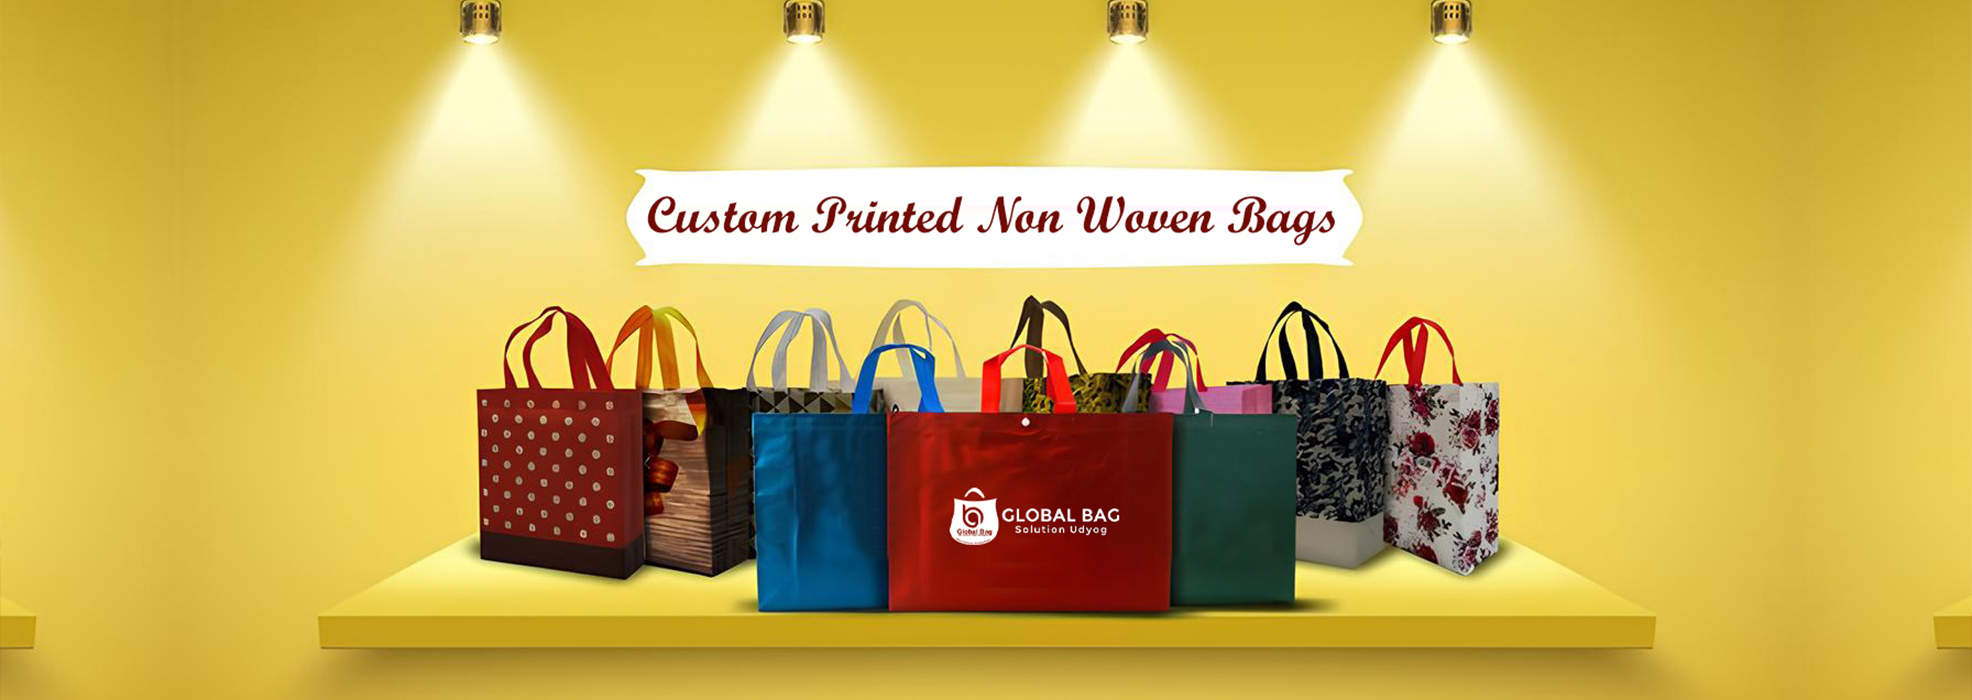 Non Woven Bags manufacturer in Jaipur